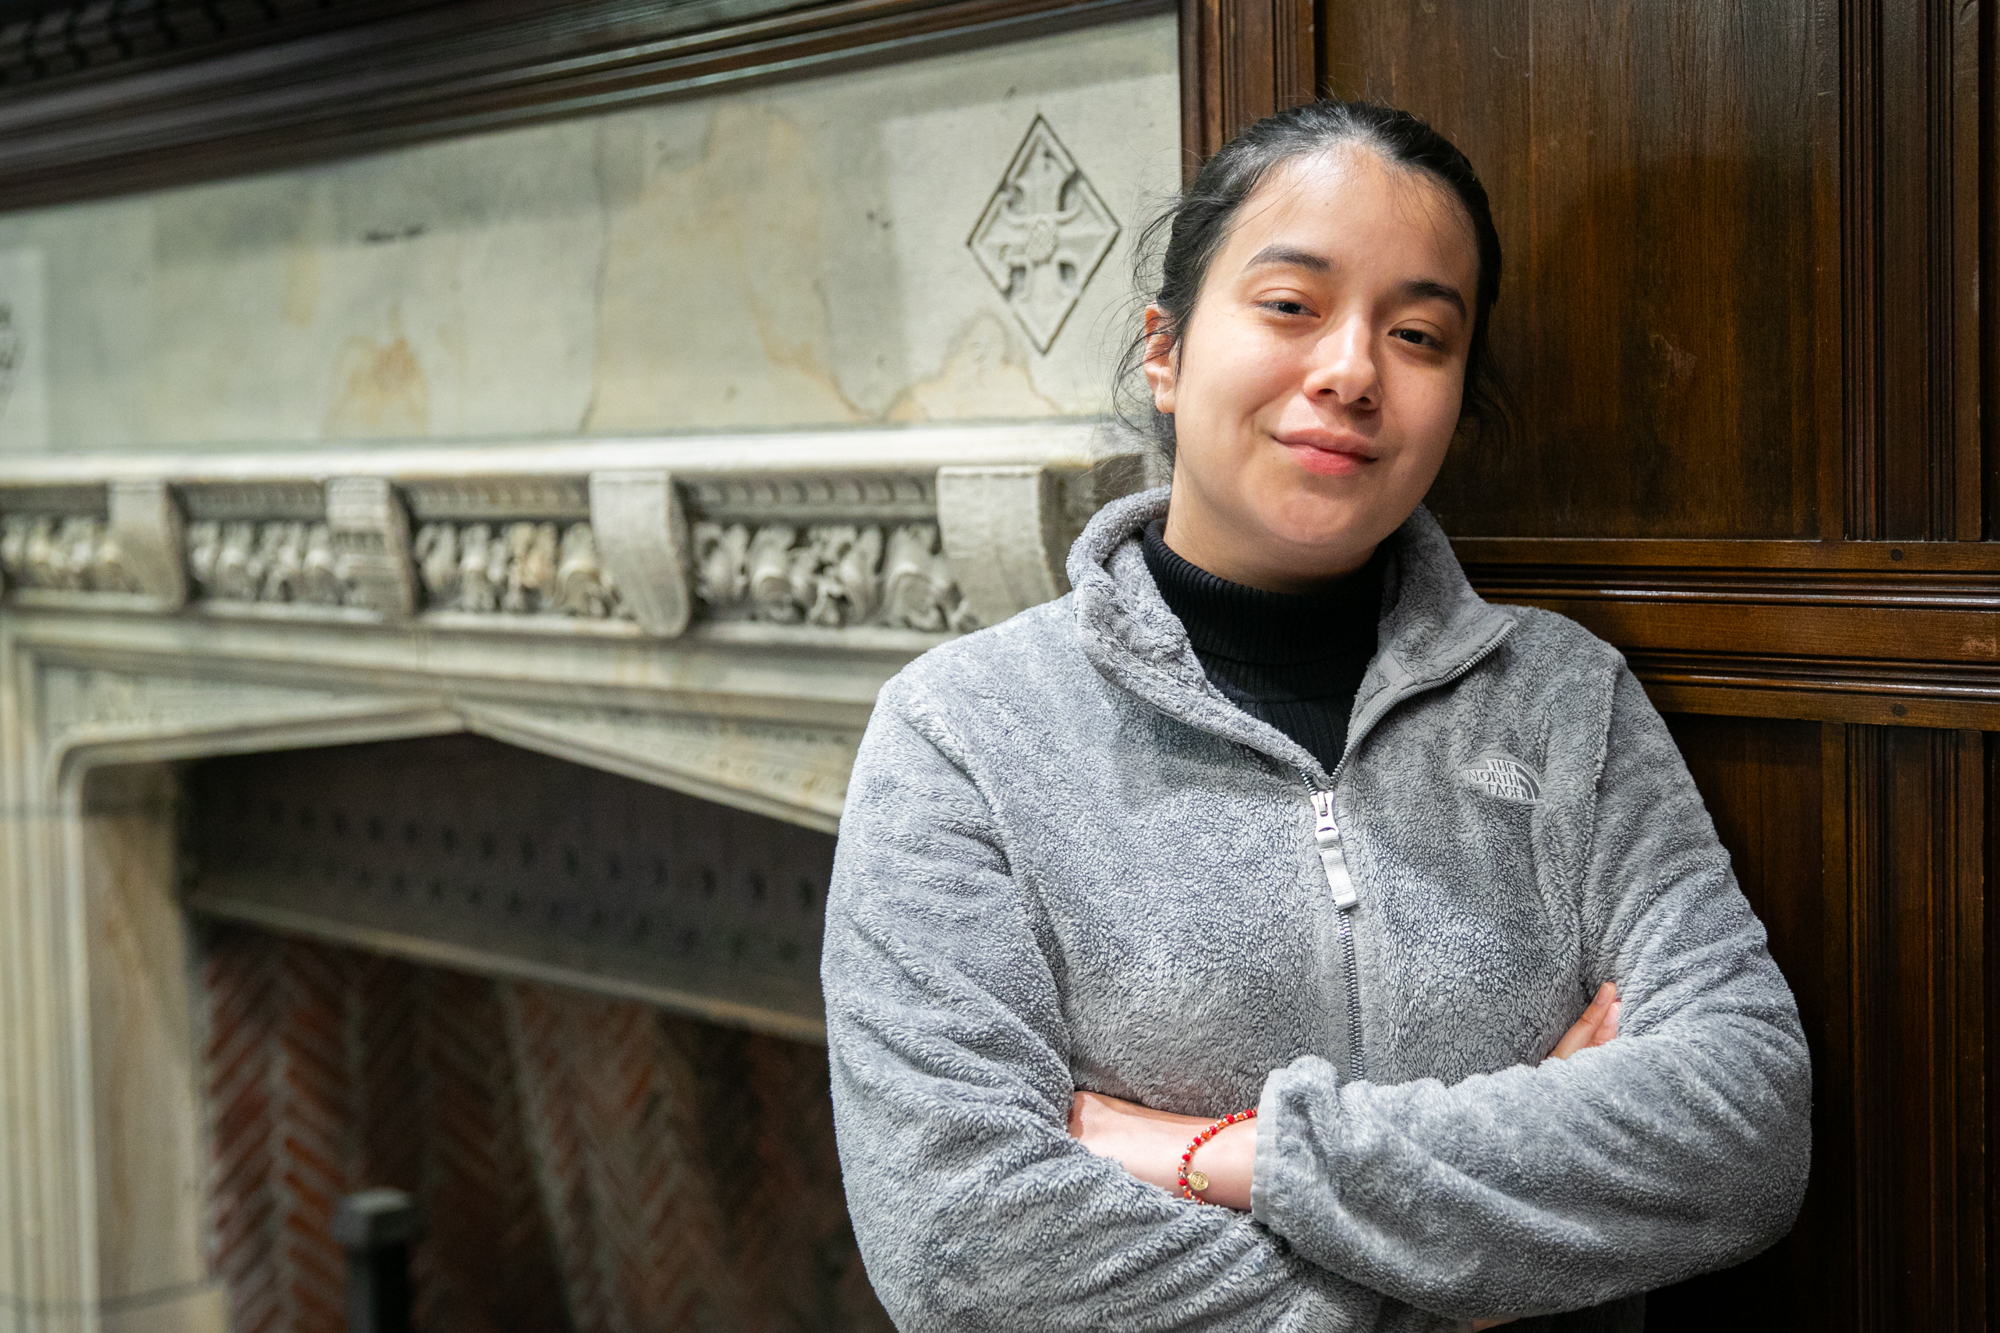 Penn fourth-year Daisy Arizmendi poses near a stone fireplace inside a sitting room at The ARCH building on Penn's campus.